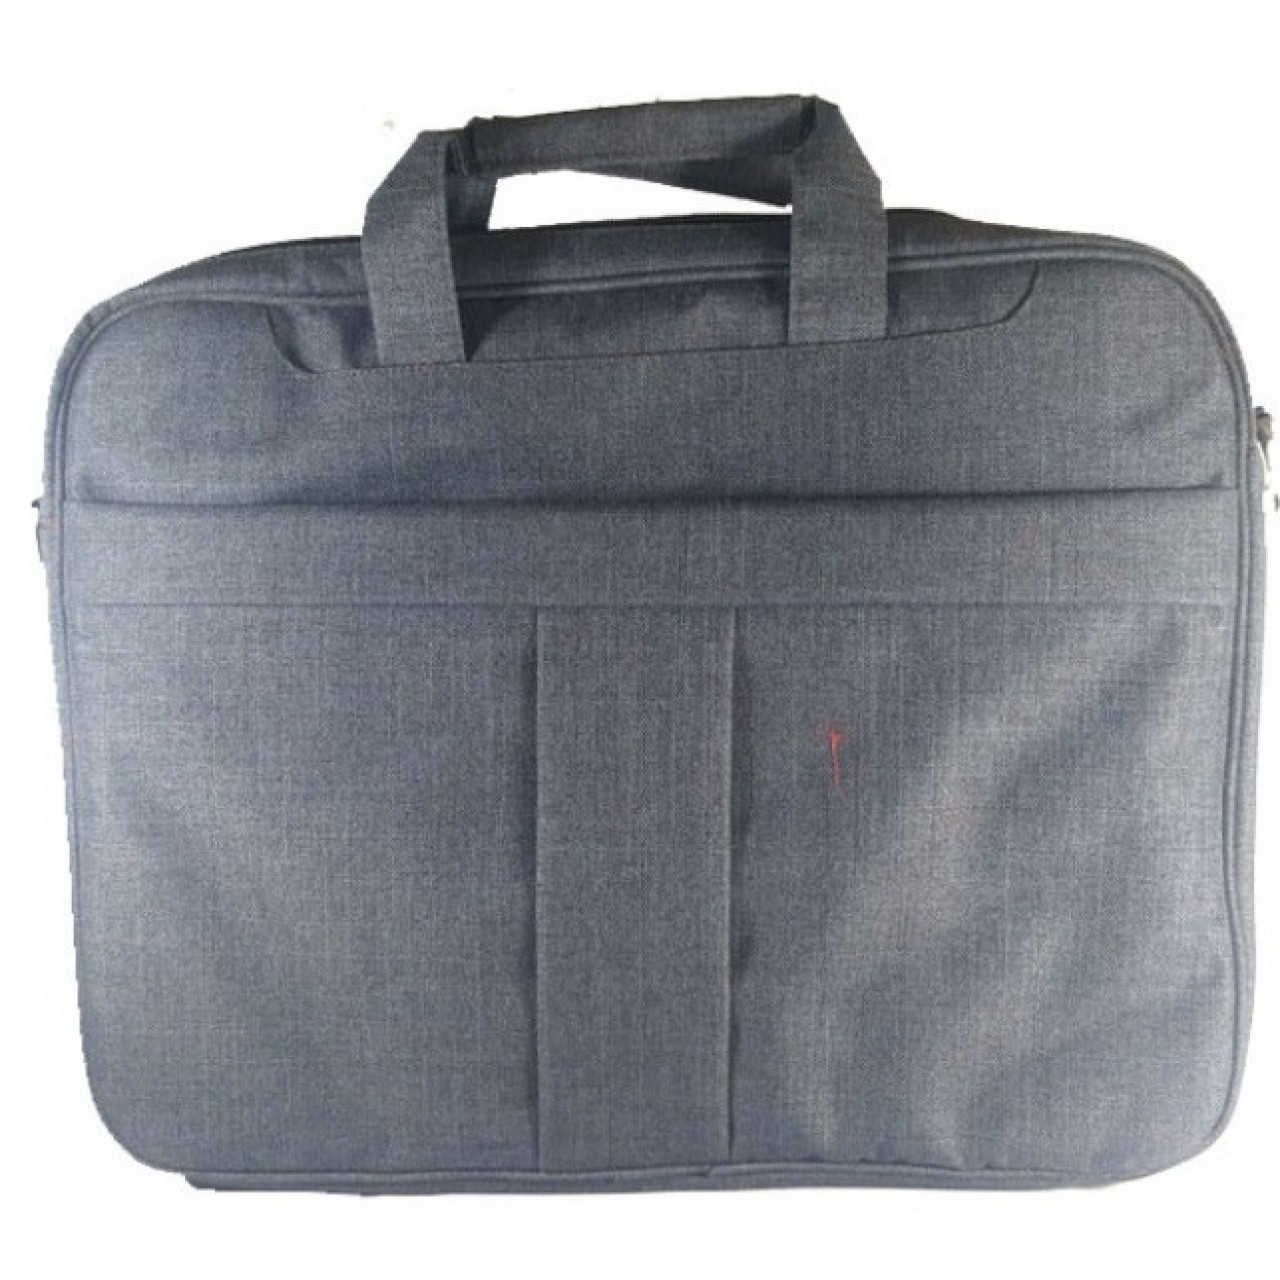 Frosted Fabric Office , Hand And Totes Casual 15.6 Inch Shoulder Bag - Grey